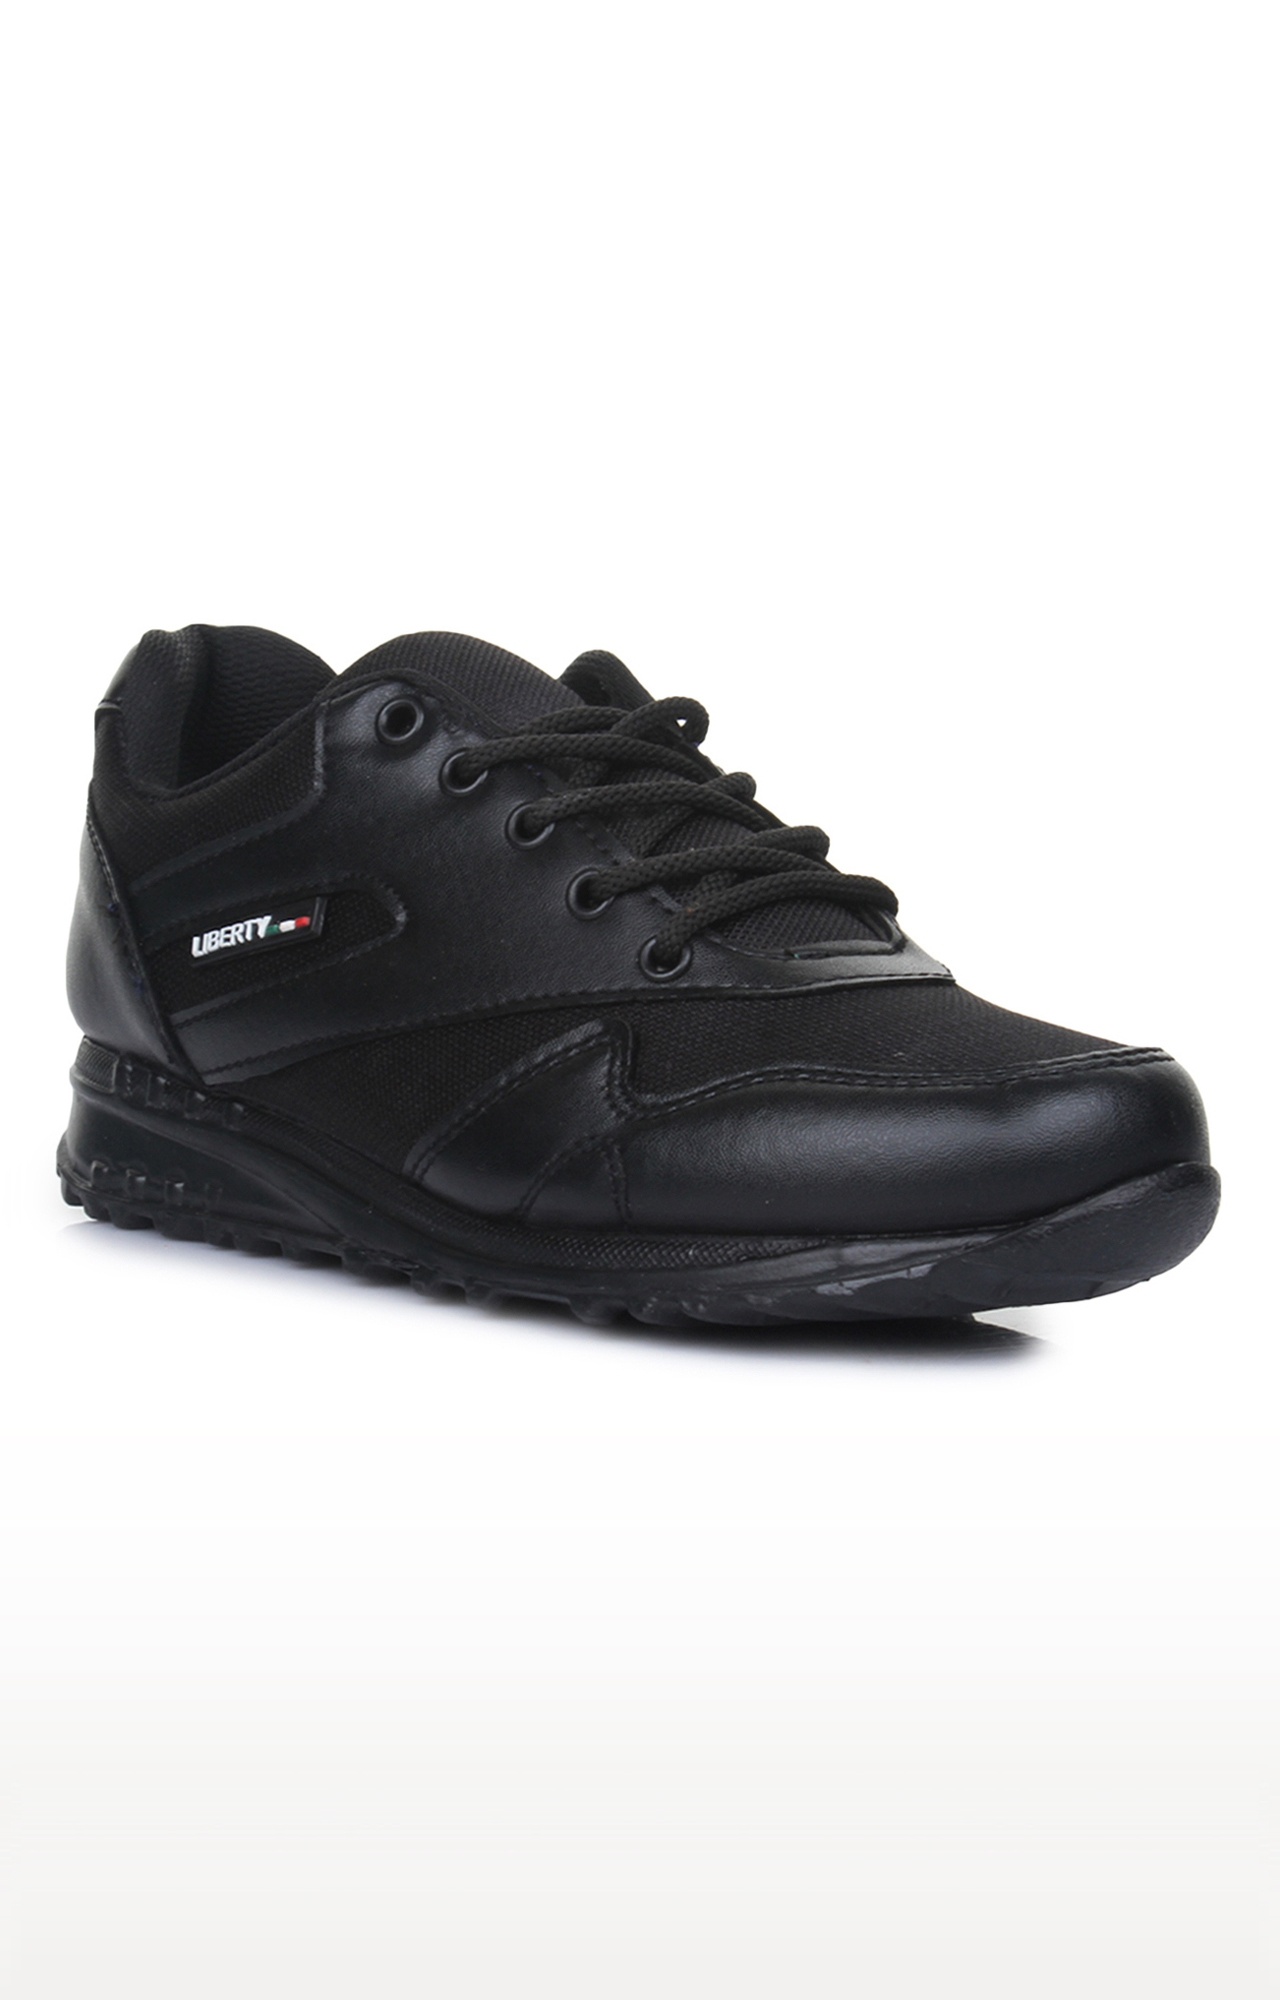 Liberty | Force 10 By Liberty Indoor Sports Shoes